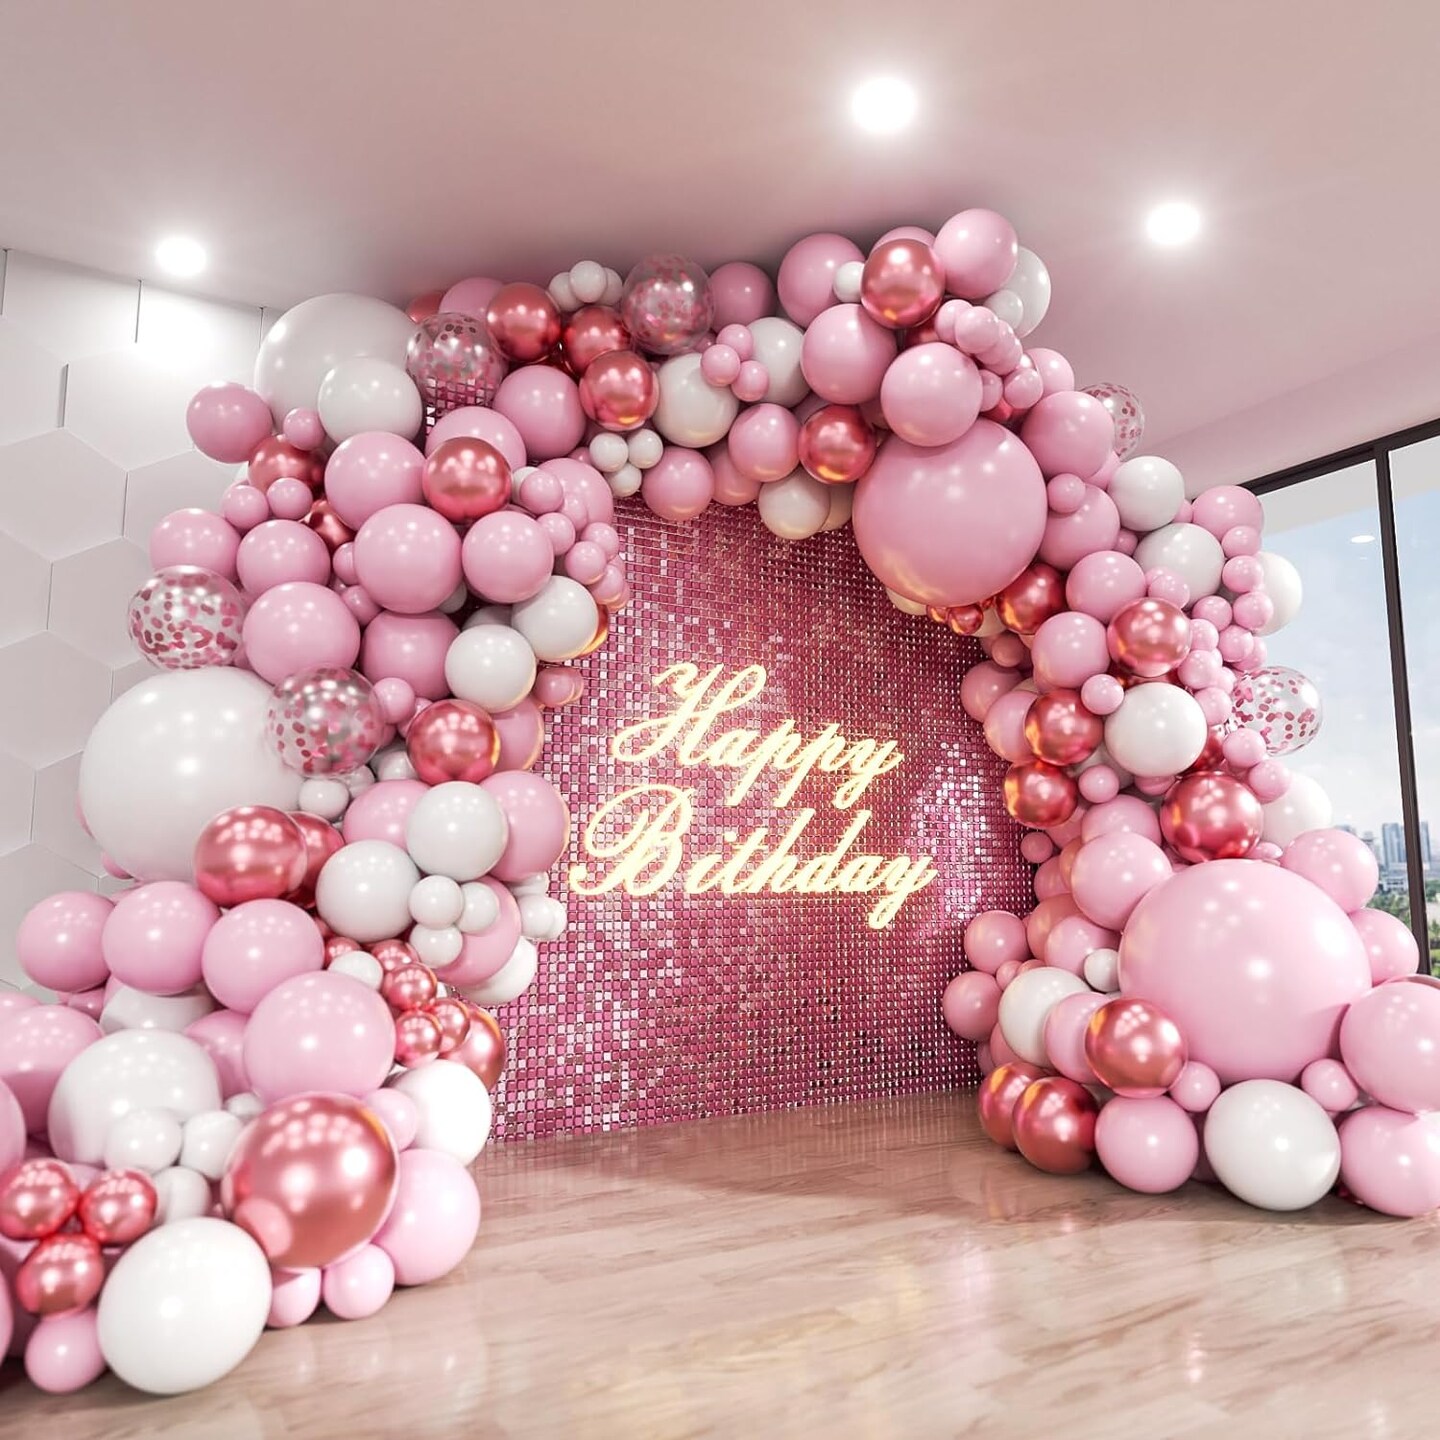 Pink Balloon Arch Kit, 140Pcs Pastel Light Metallic Pink and White Balloons with Pink Confetti Balloon Garland Kit for Birthday, Wedding, Engagements, Baby Shower, Anniversary Party Decoration